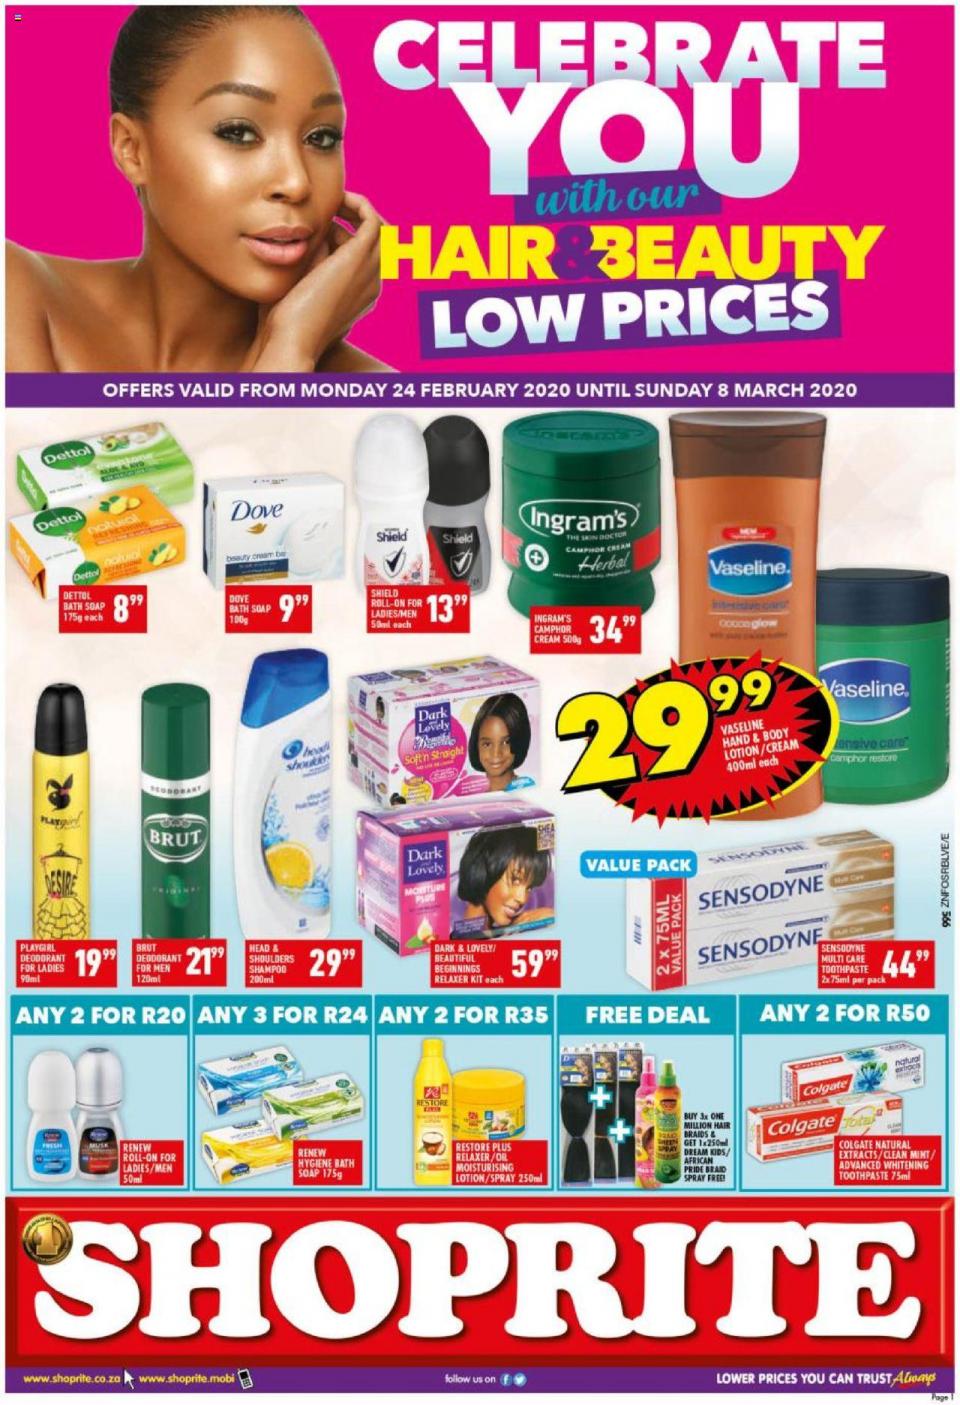 shoprite specials hair beauty promotion 26 february 2020